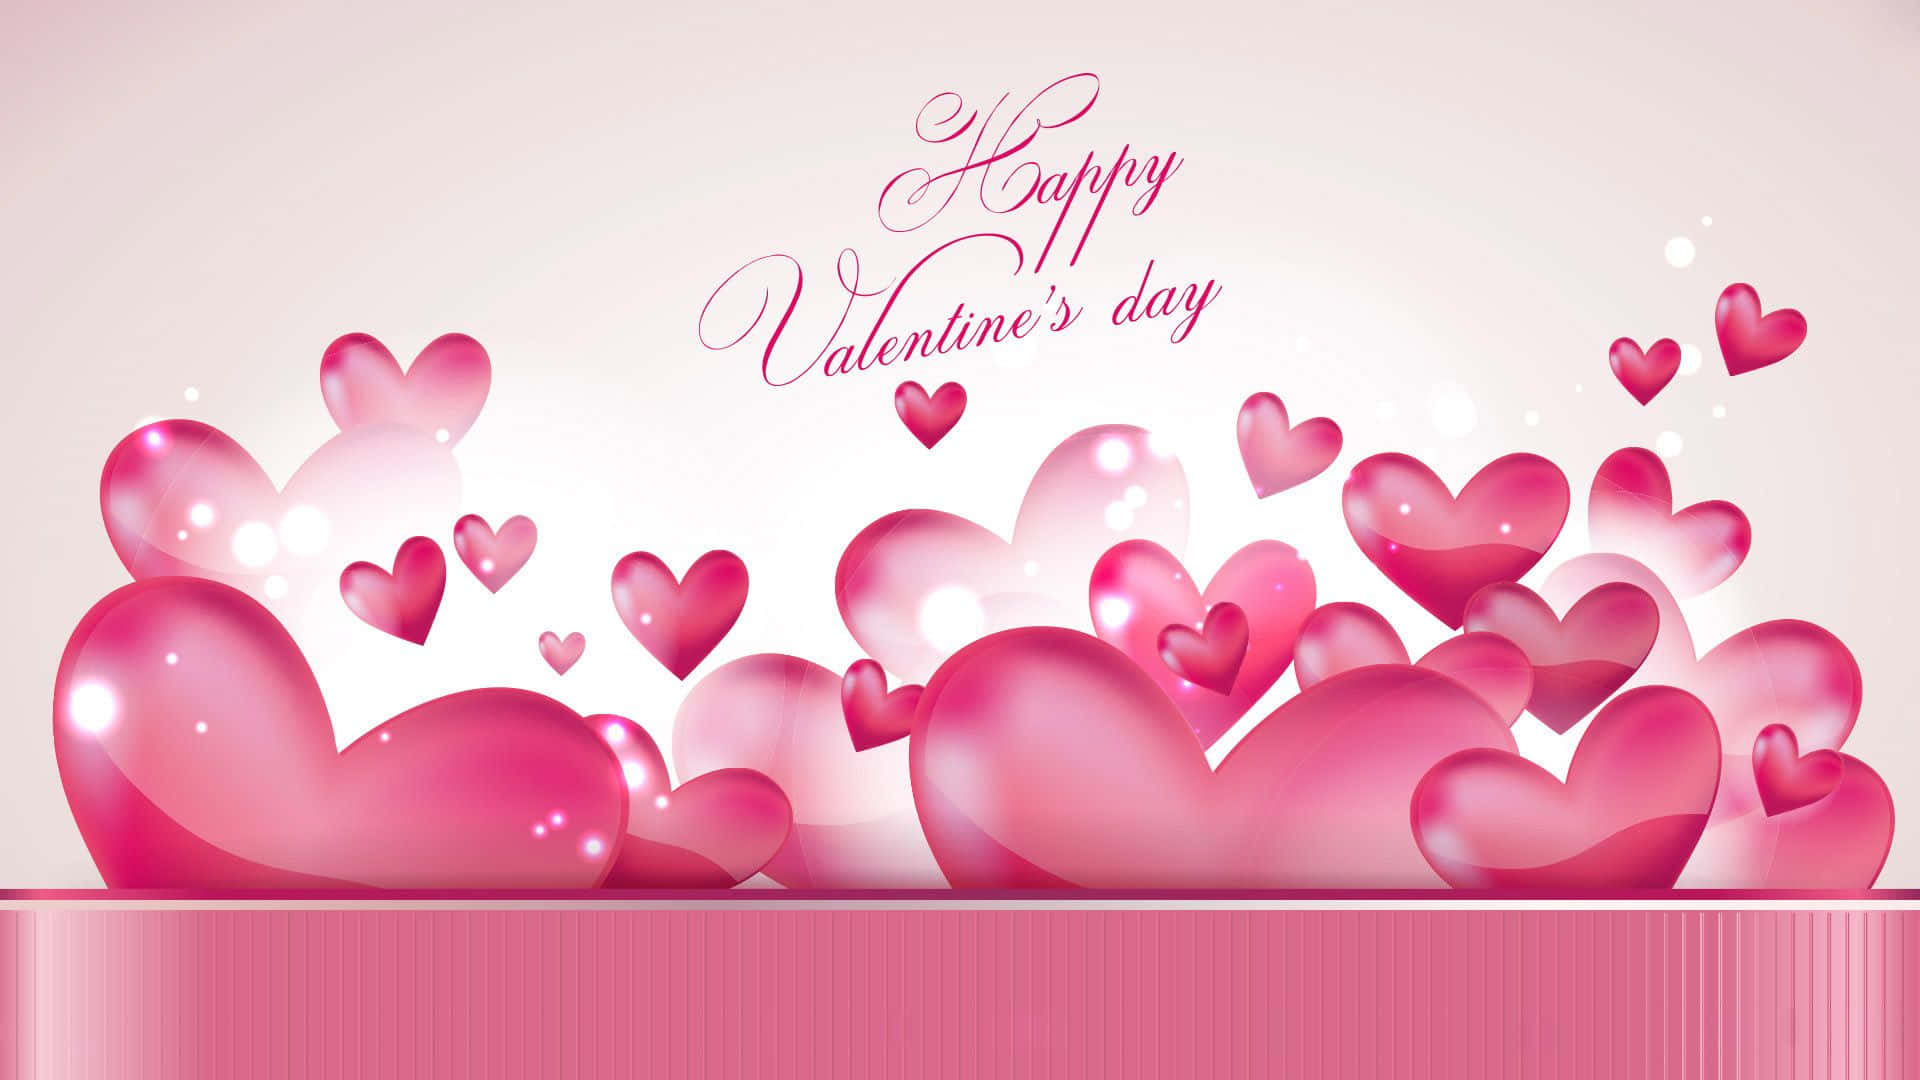 Celebrate love on Valentine's Day with this gorgeous HD image Wallpaper